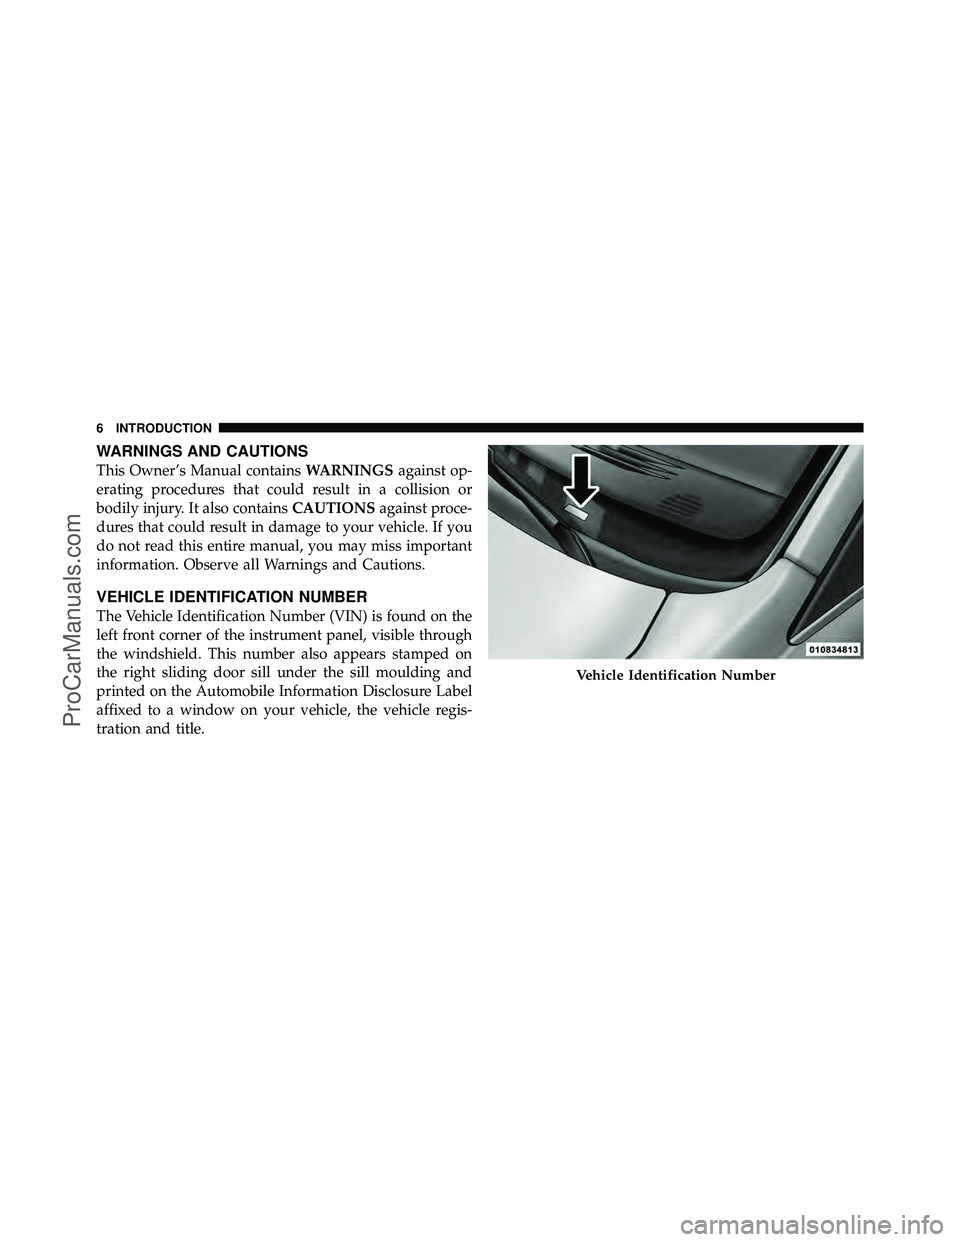 DODGE CARAVAN 2012  Owners Manual WARNINGS AND CAUTIONS
This Owner’s Manual containsWARNINGSagainst op-
erating procedures that could result in a collision or
bodily injury. It also contains CAUTIONSagainst proce-
dures that could r